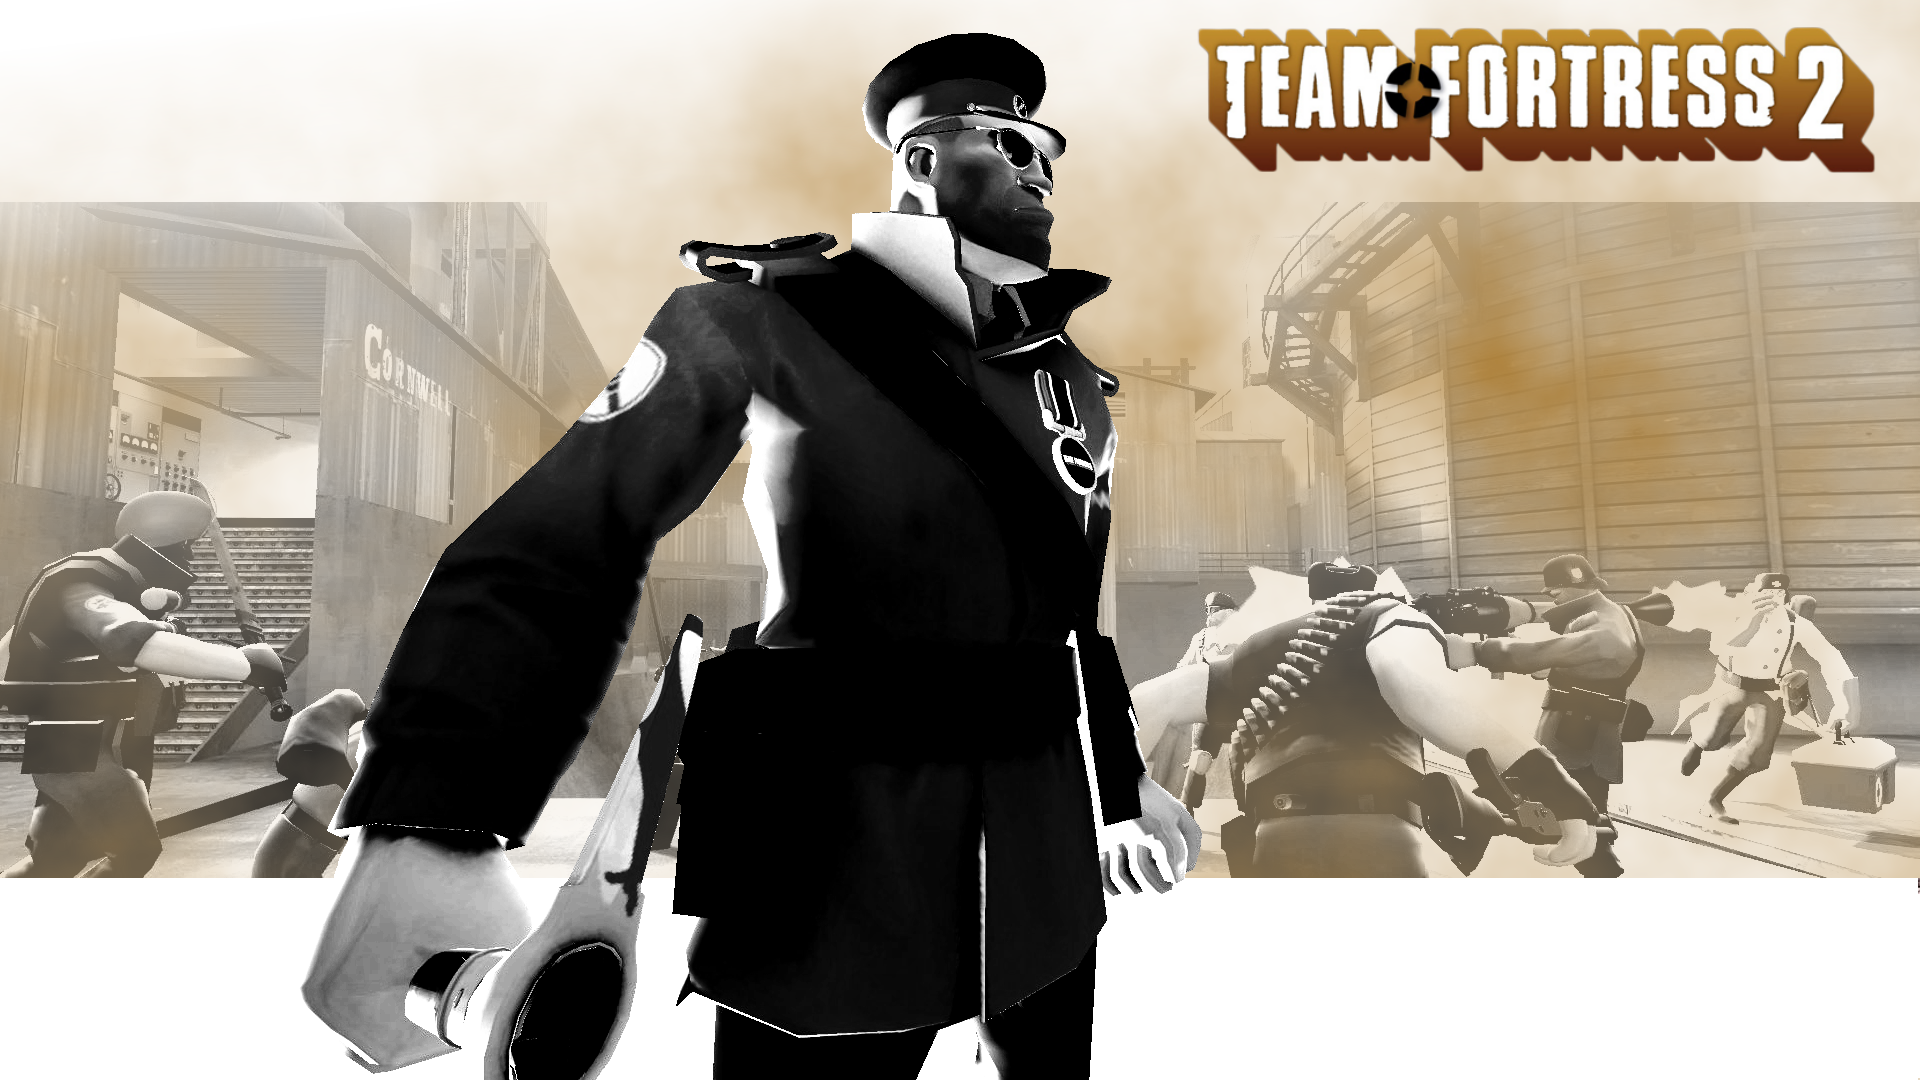 Team Fortress 2 Wallpaper in CoH2 style